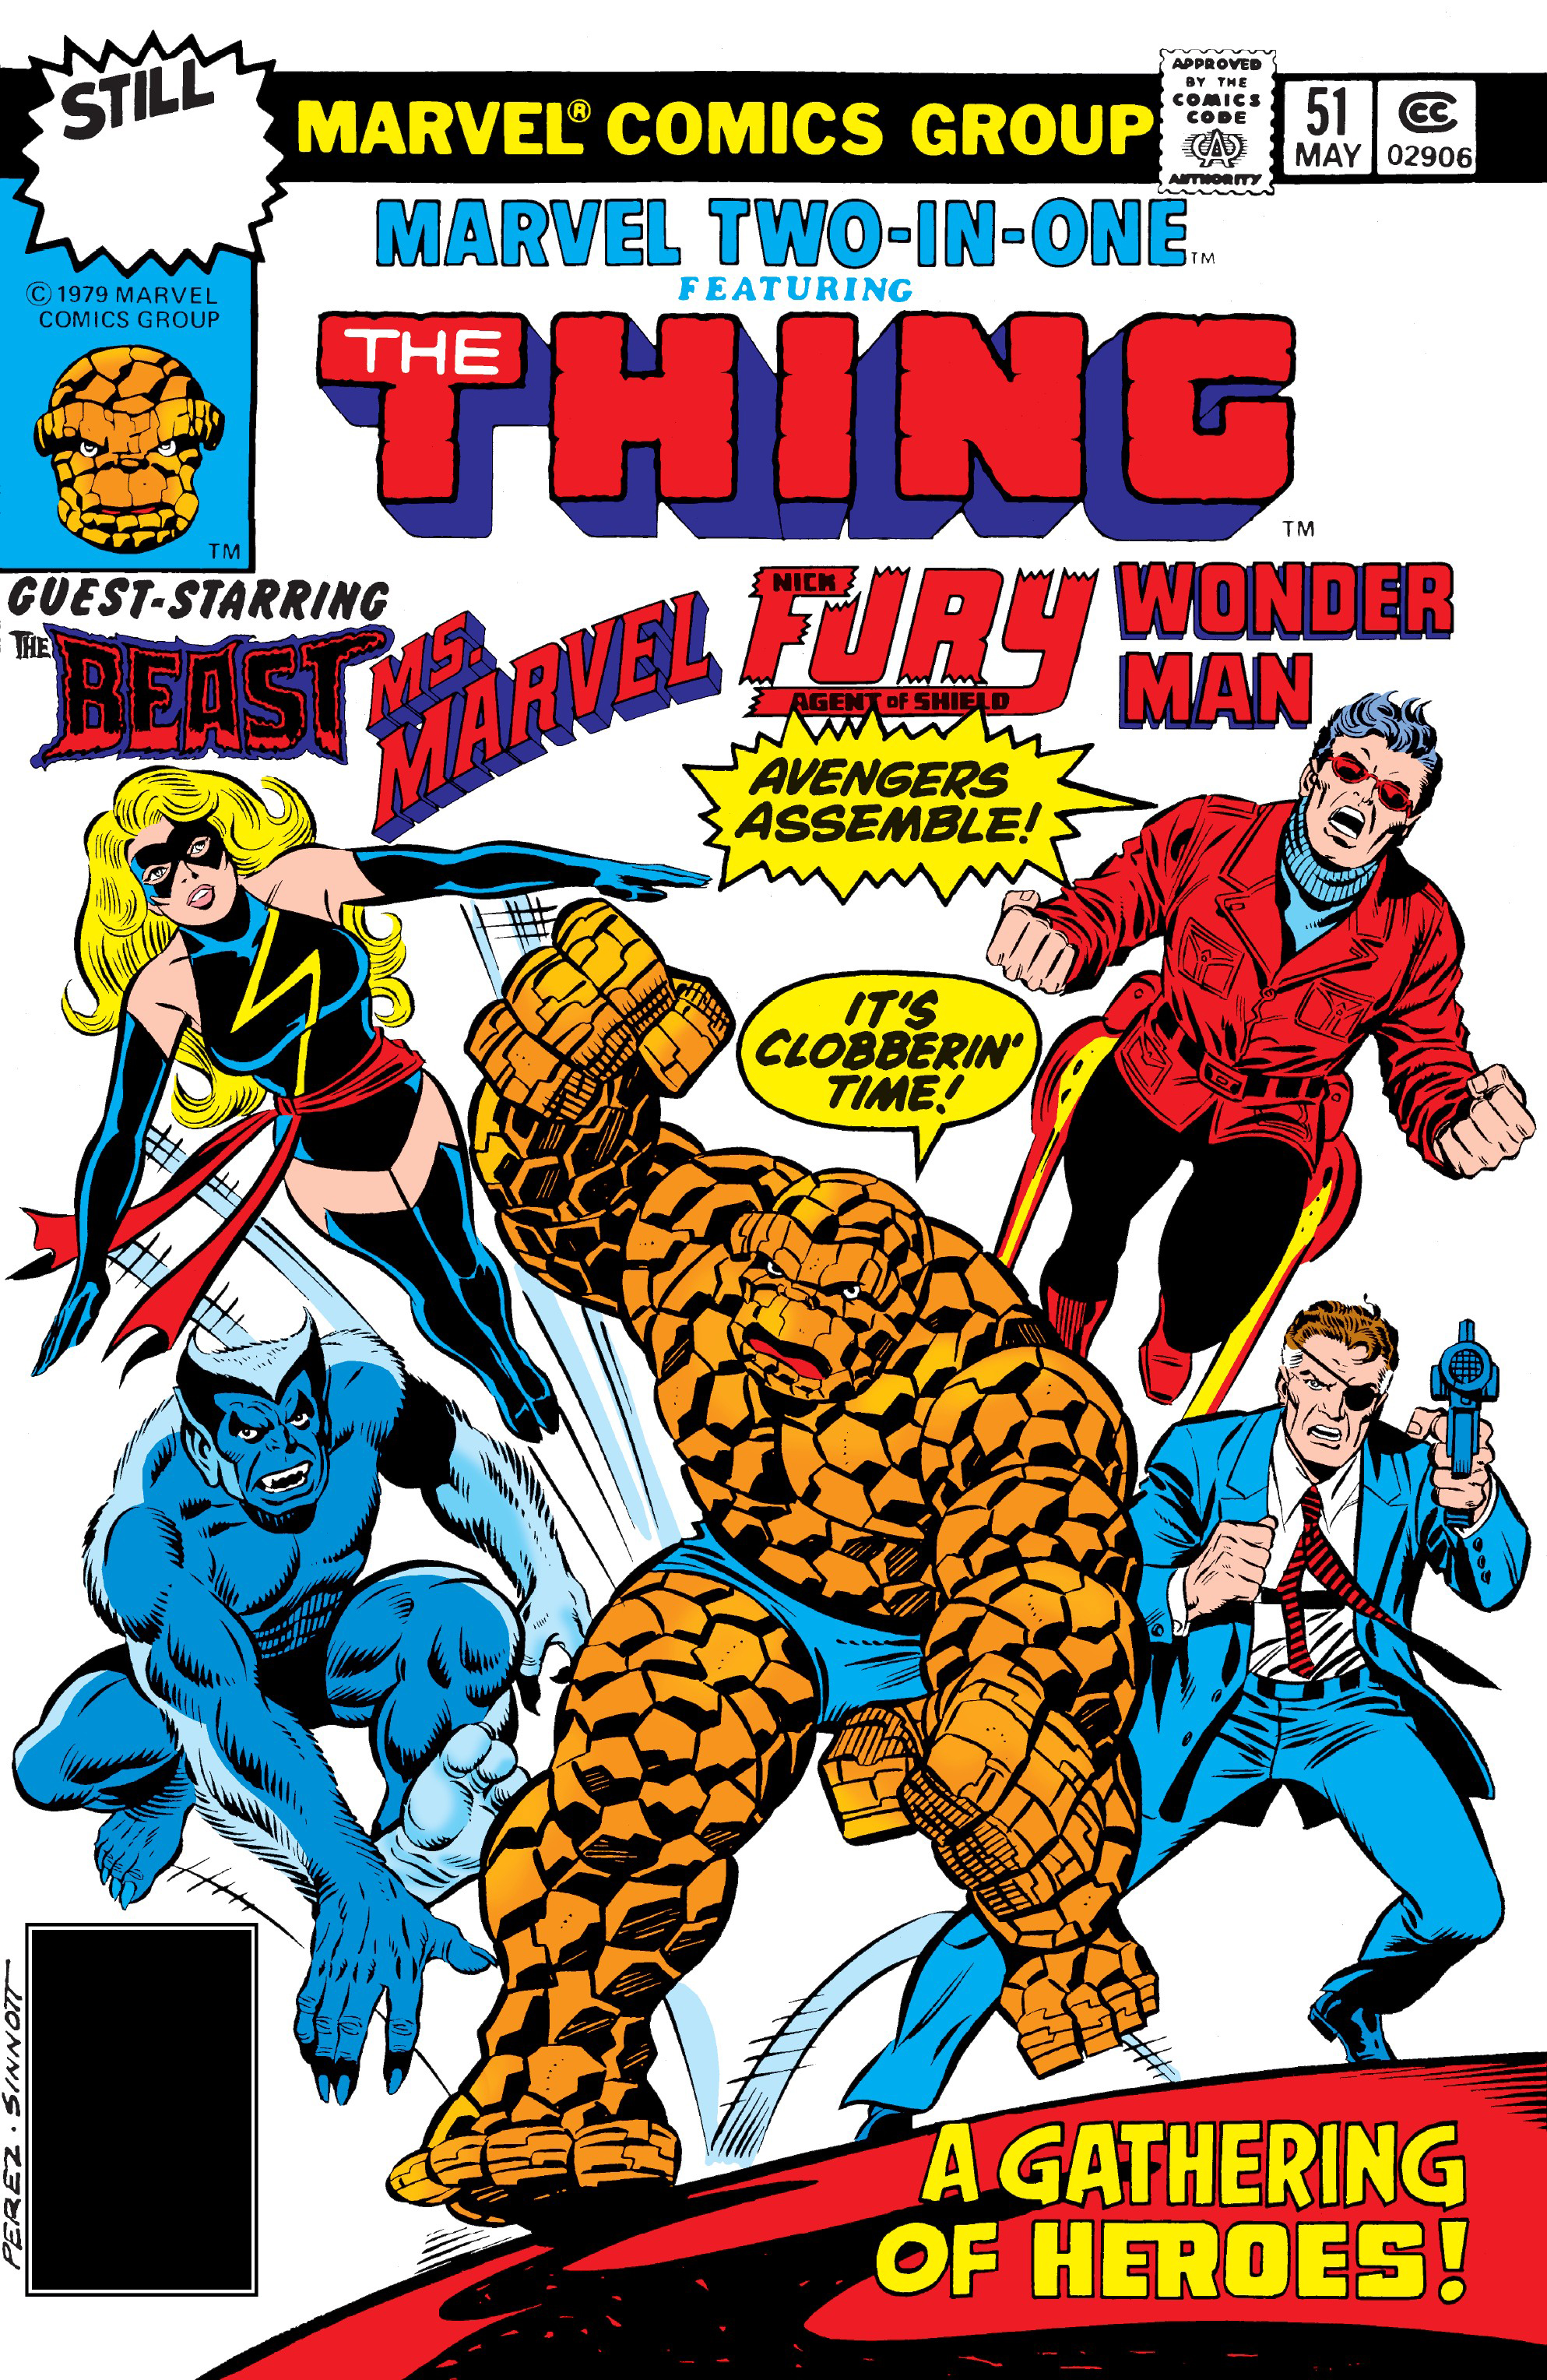 Read online Marvel Two-In-One comic -  Issue #51 - 1